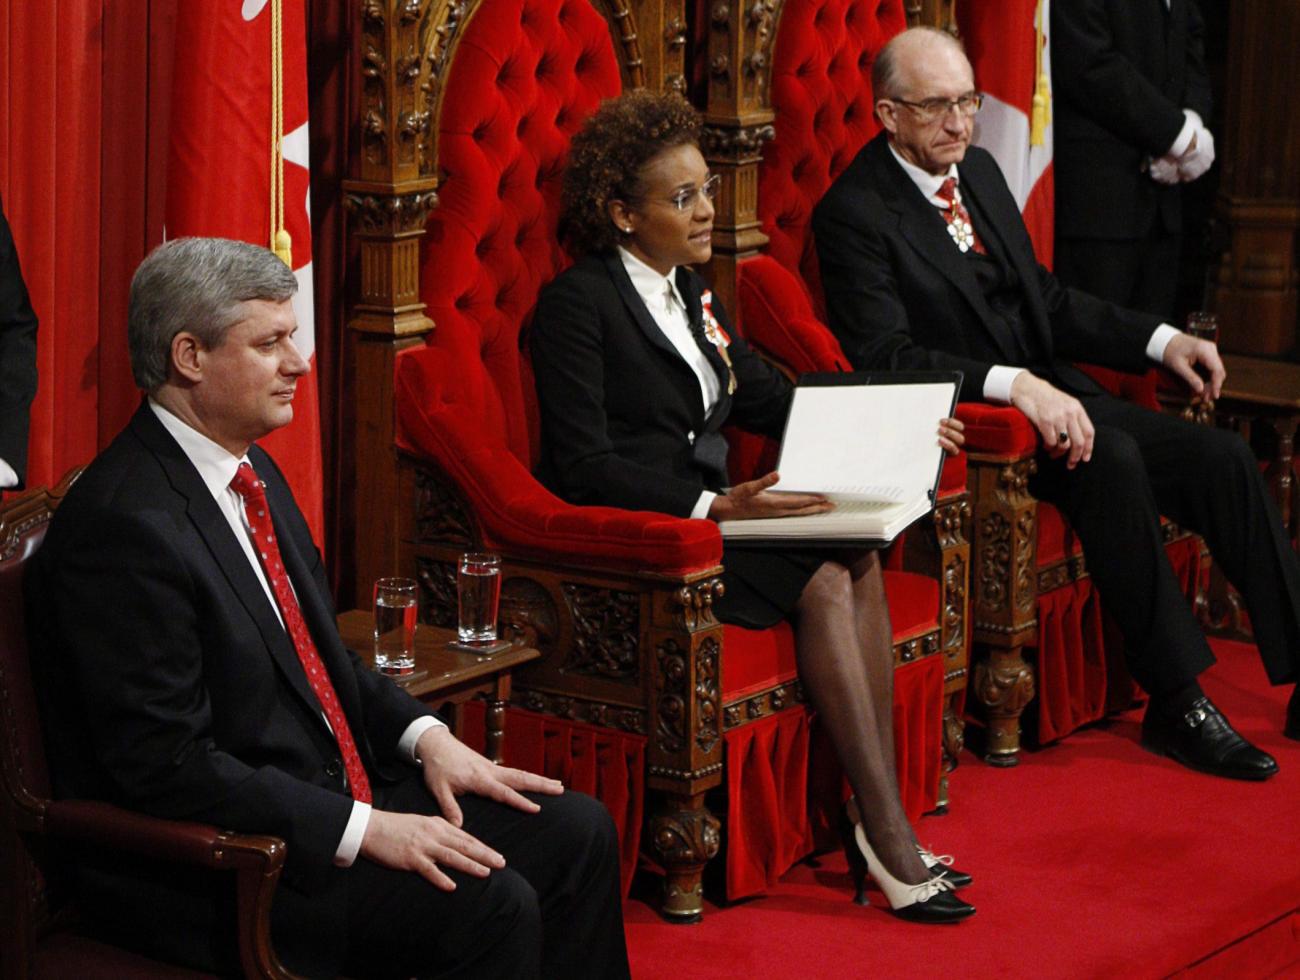 Michaëlle Jean sitting on a red throne between two men, one on a red throne, the other on a chair.